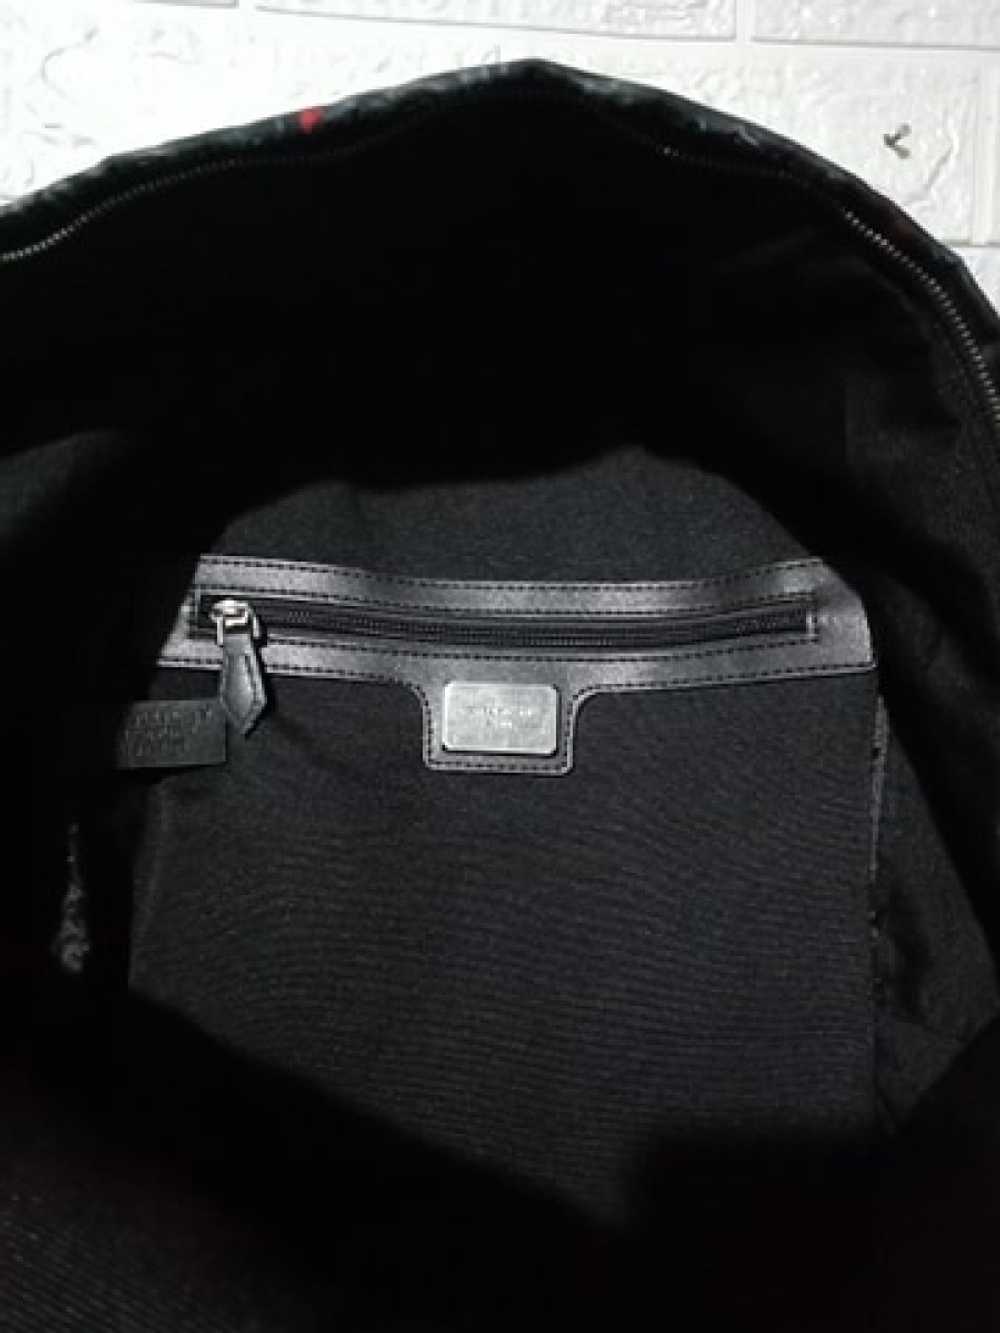 Givenchy backpack screaming monkey brothers rare - image 8